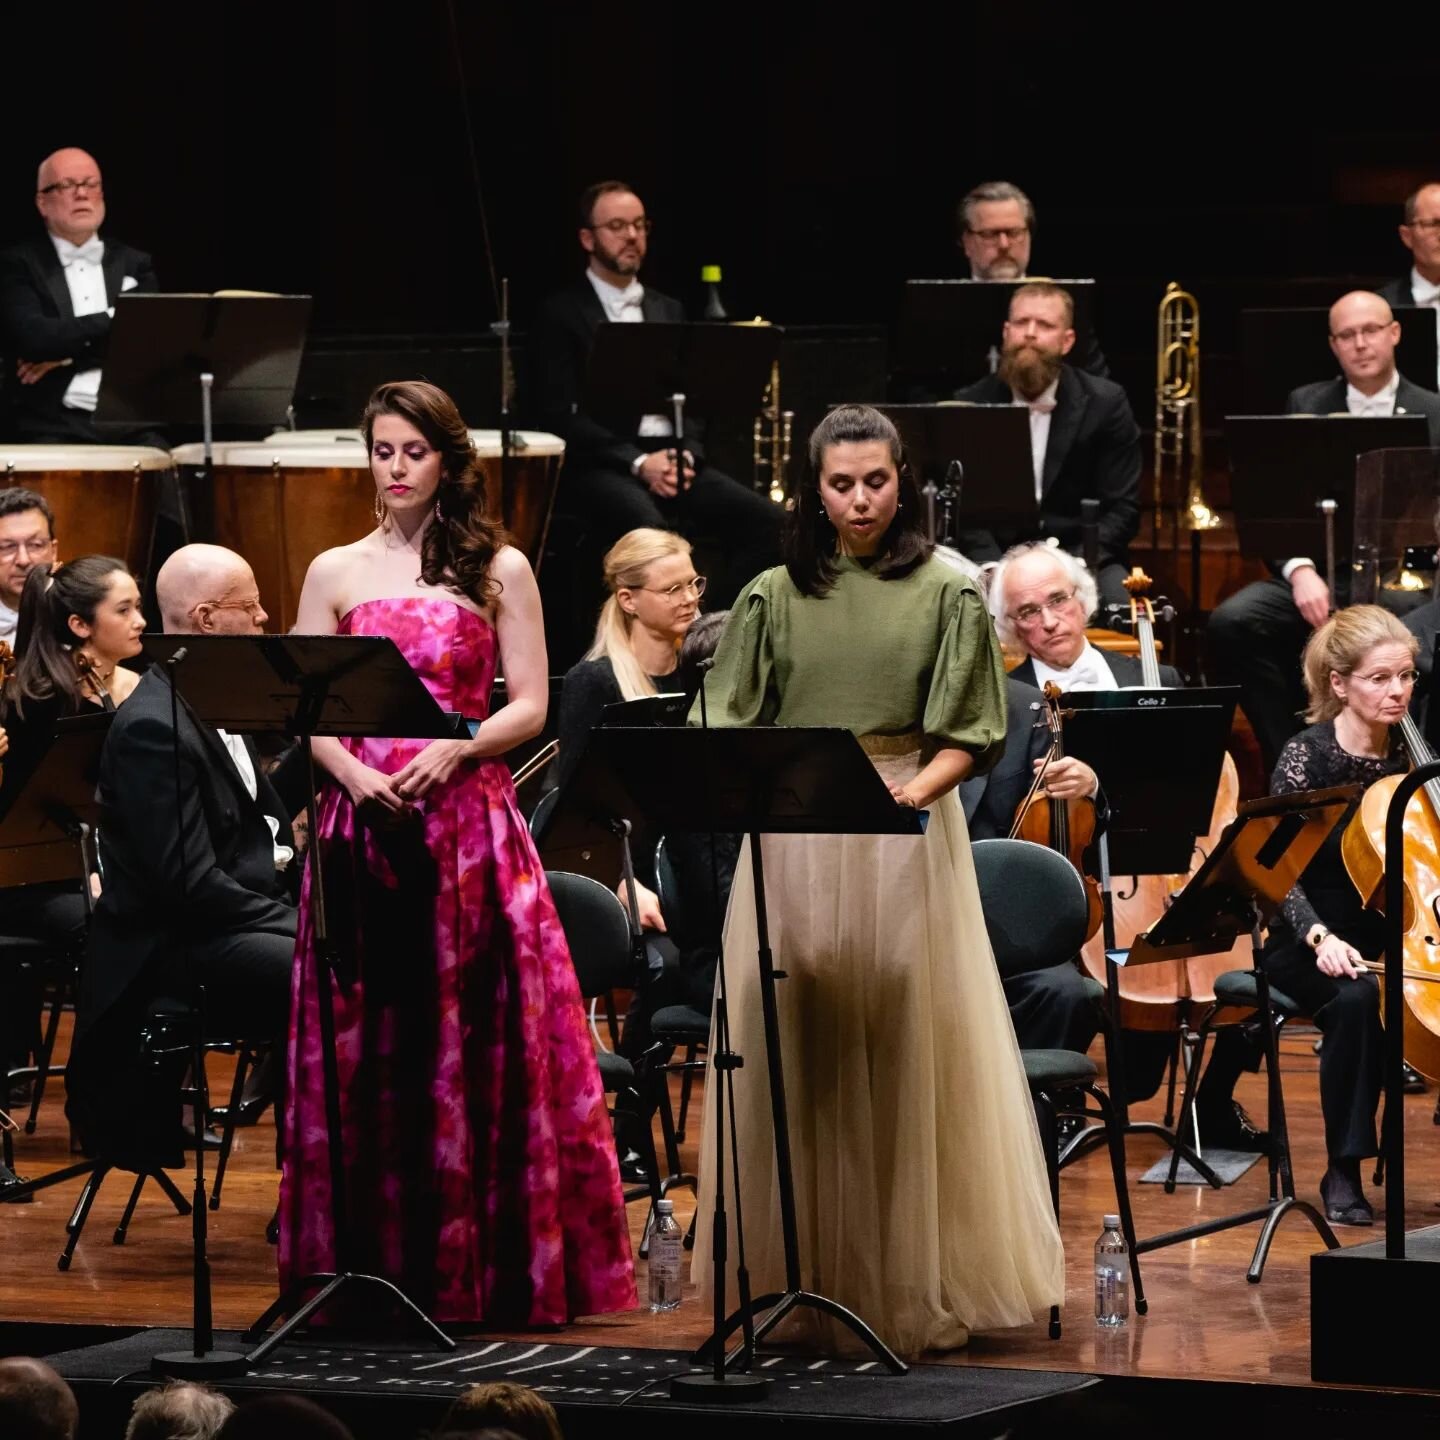 Got to experience singing Beethoven's Missa Solemnis in Oslo with @filharmonien and @oslofilharmoniskekor under the baton of @klausmakelaofficial last week.
Two sold out concerts with high musical energy and intensity💥!!! A night to remember!

It is